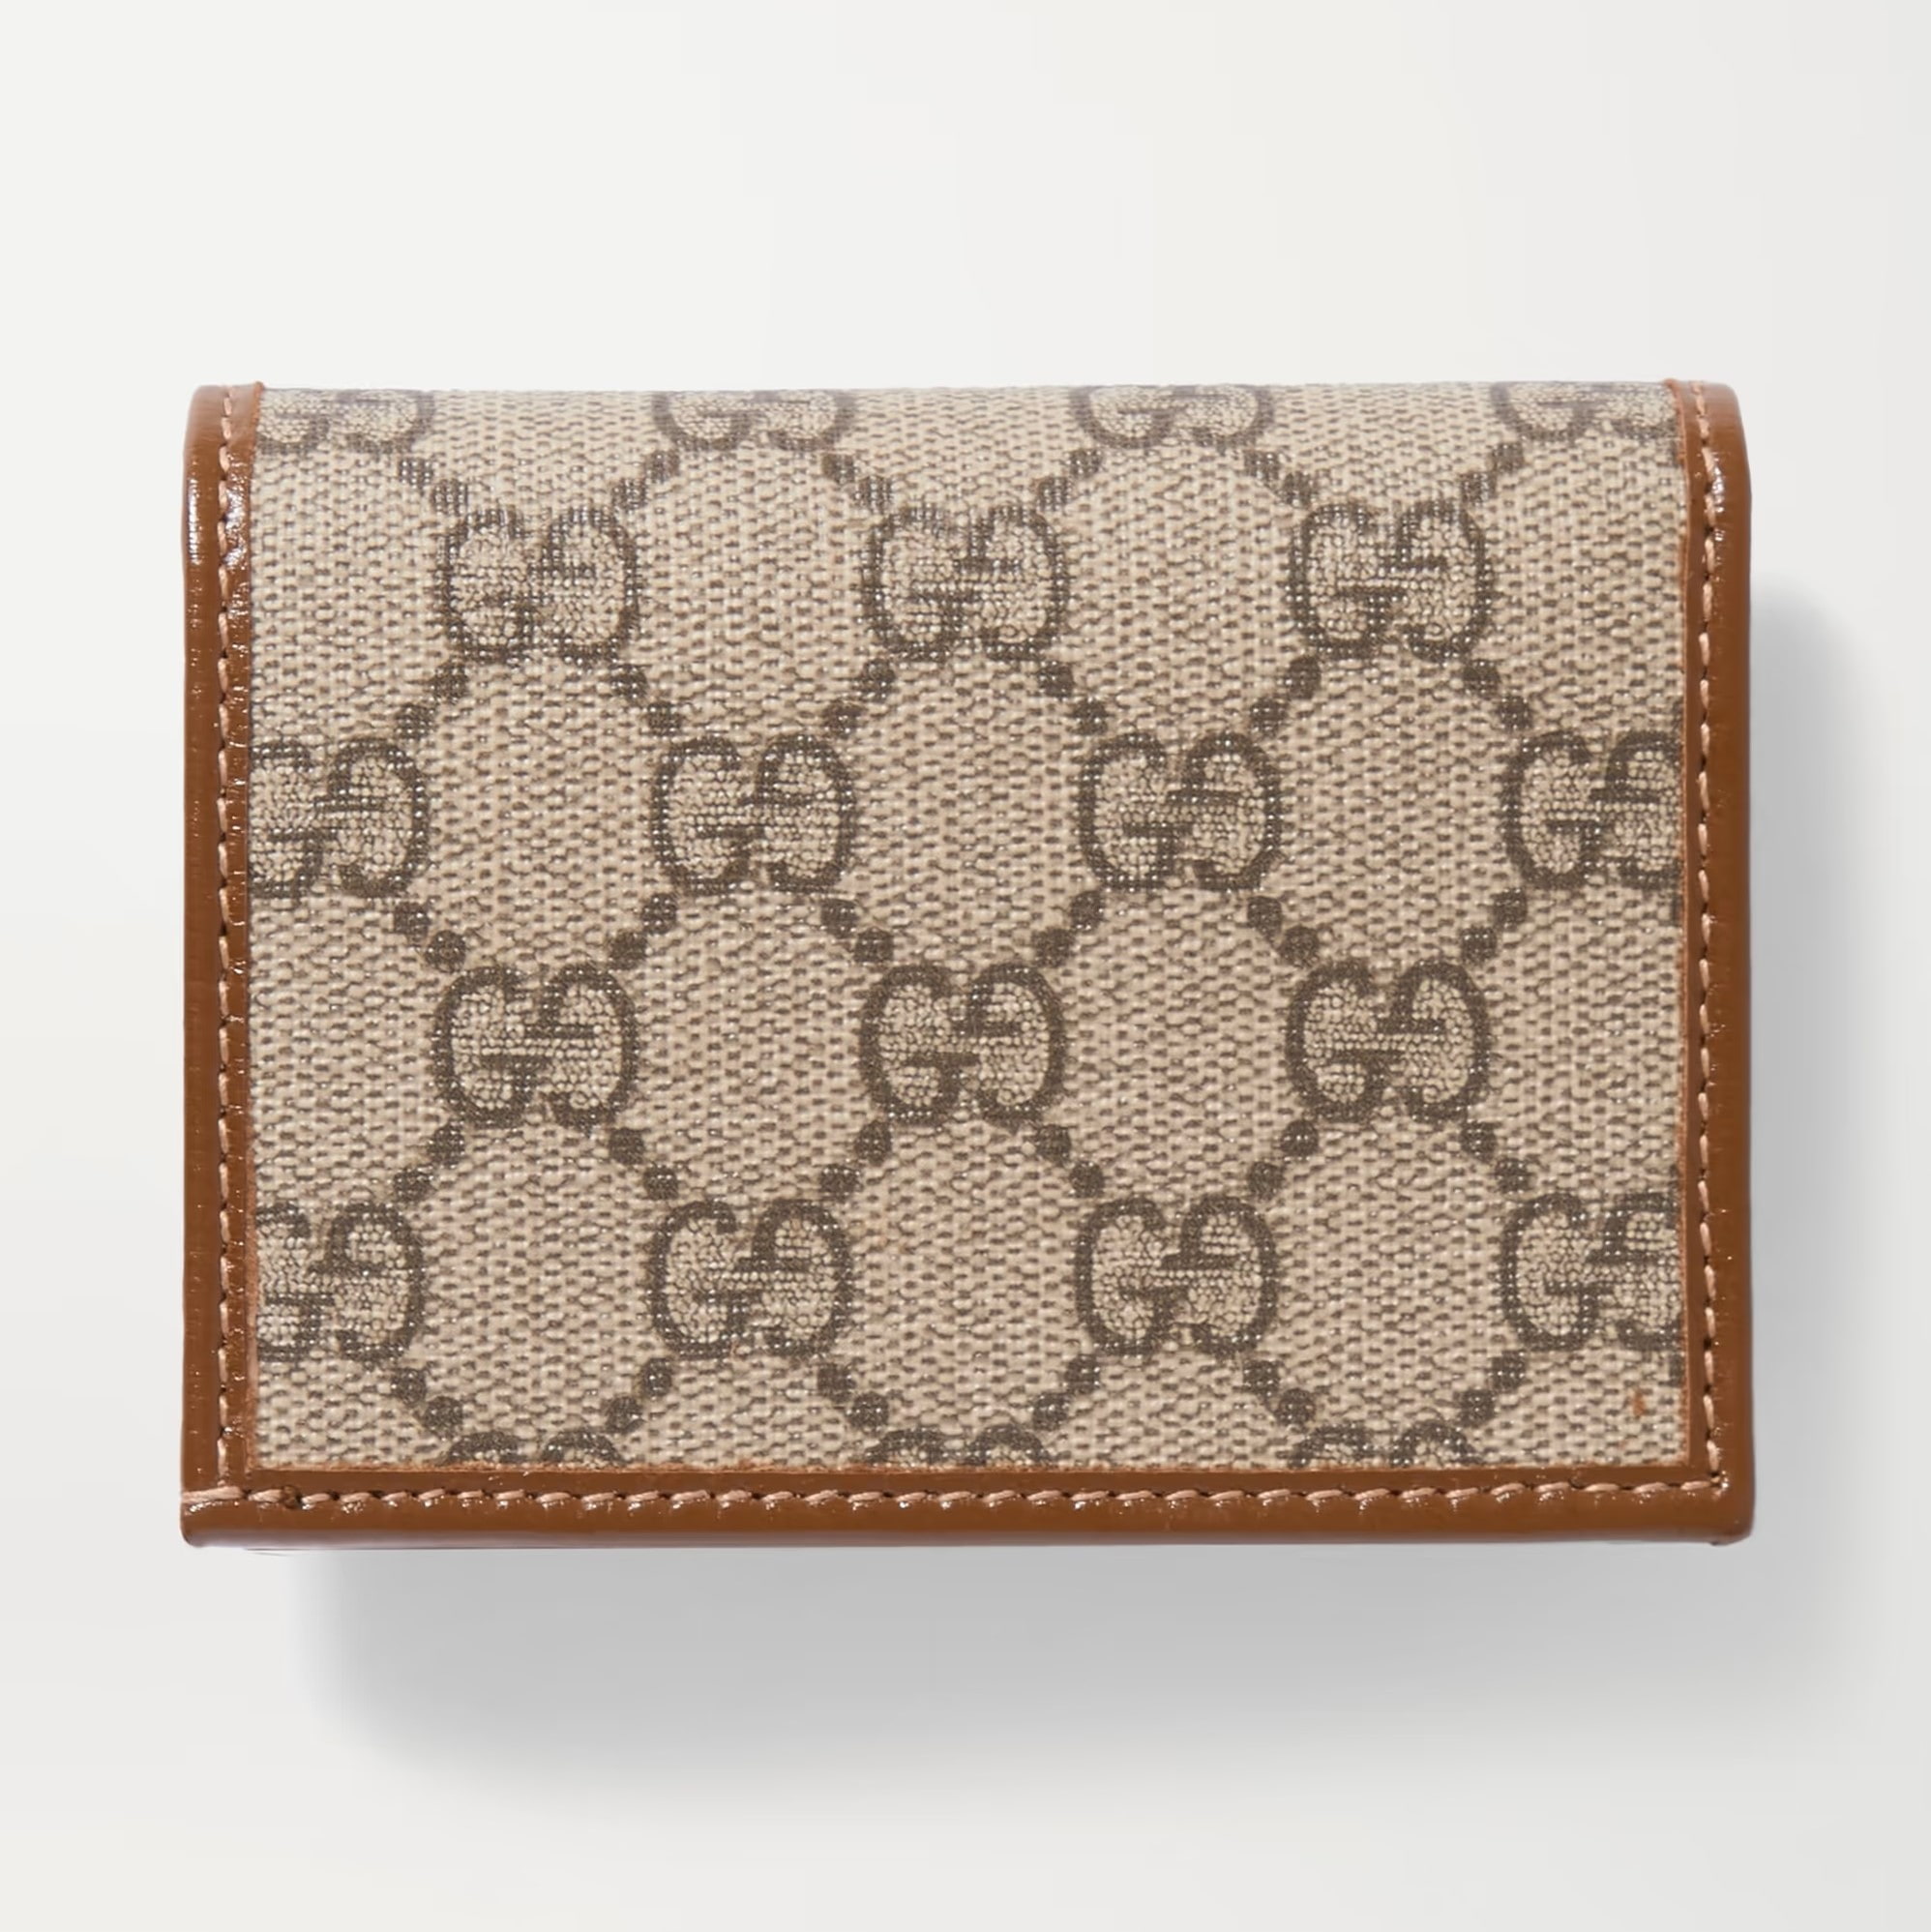 VÍ CẦM TAY NỮ GUCCI HORSEBIT 1955 BEIGE LEATHER TRIMMED PRINTED COATED CANVAS WALLET 5